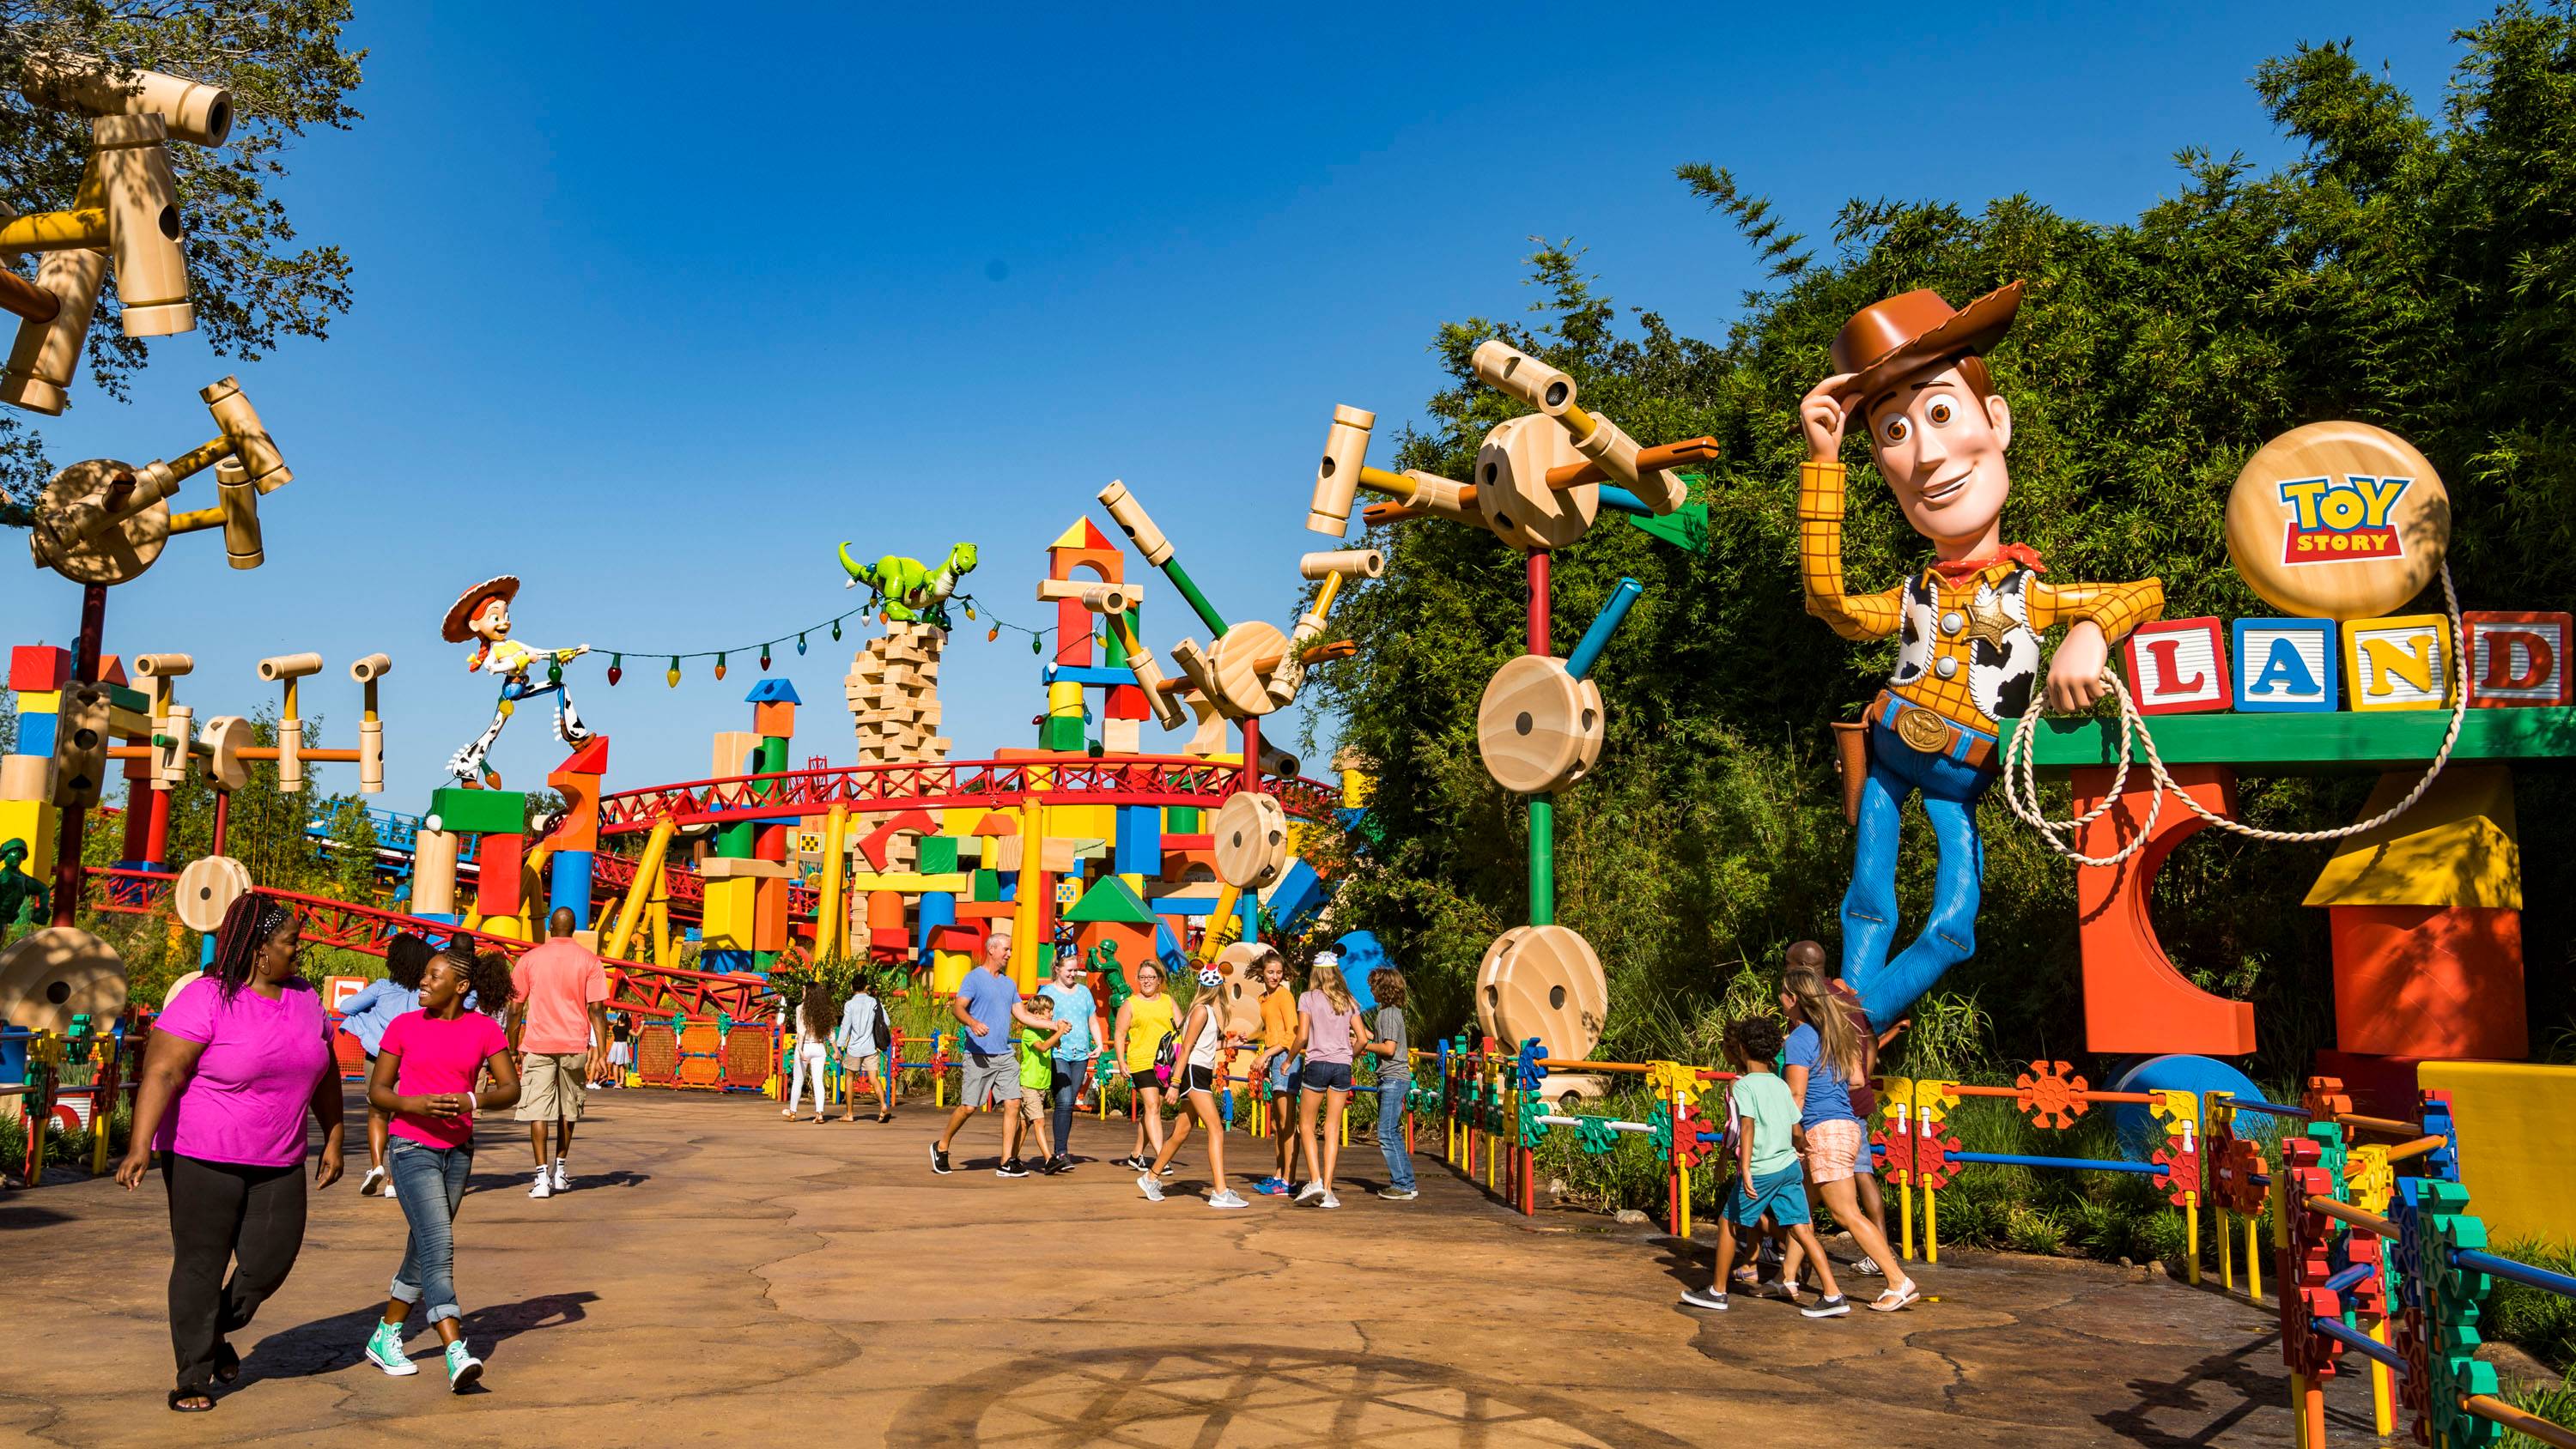 The entrance to Toy Story Land